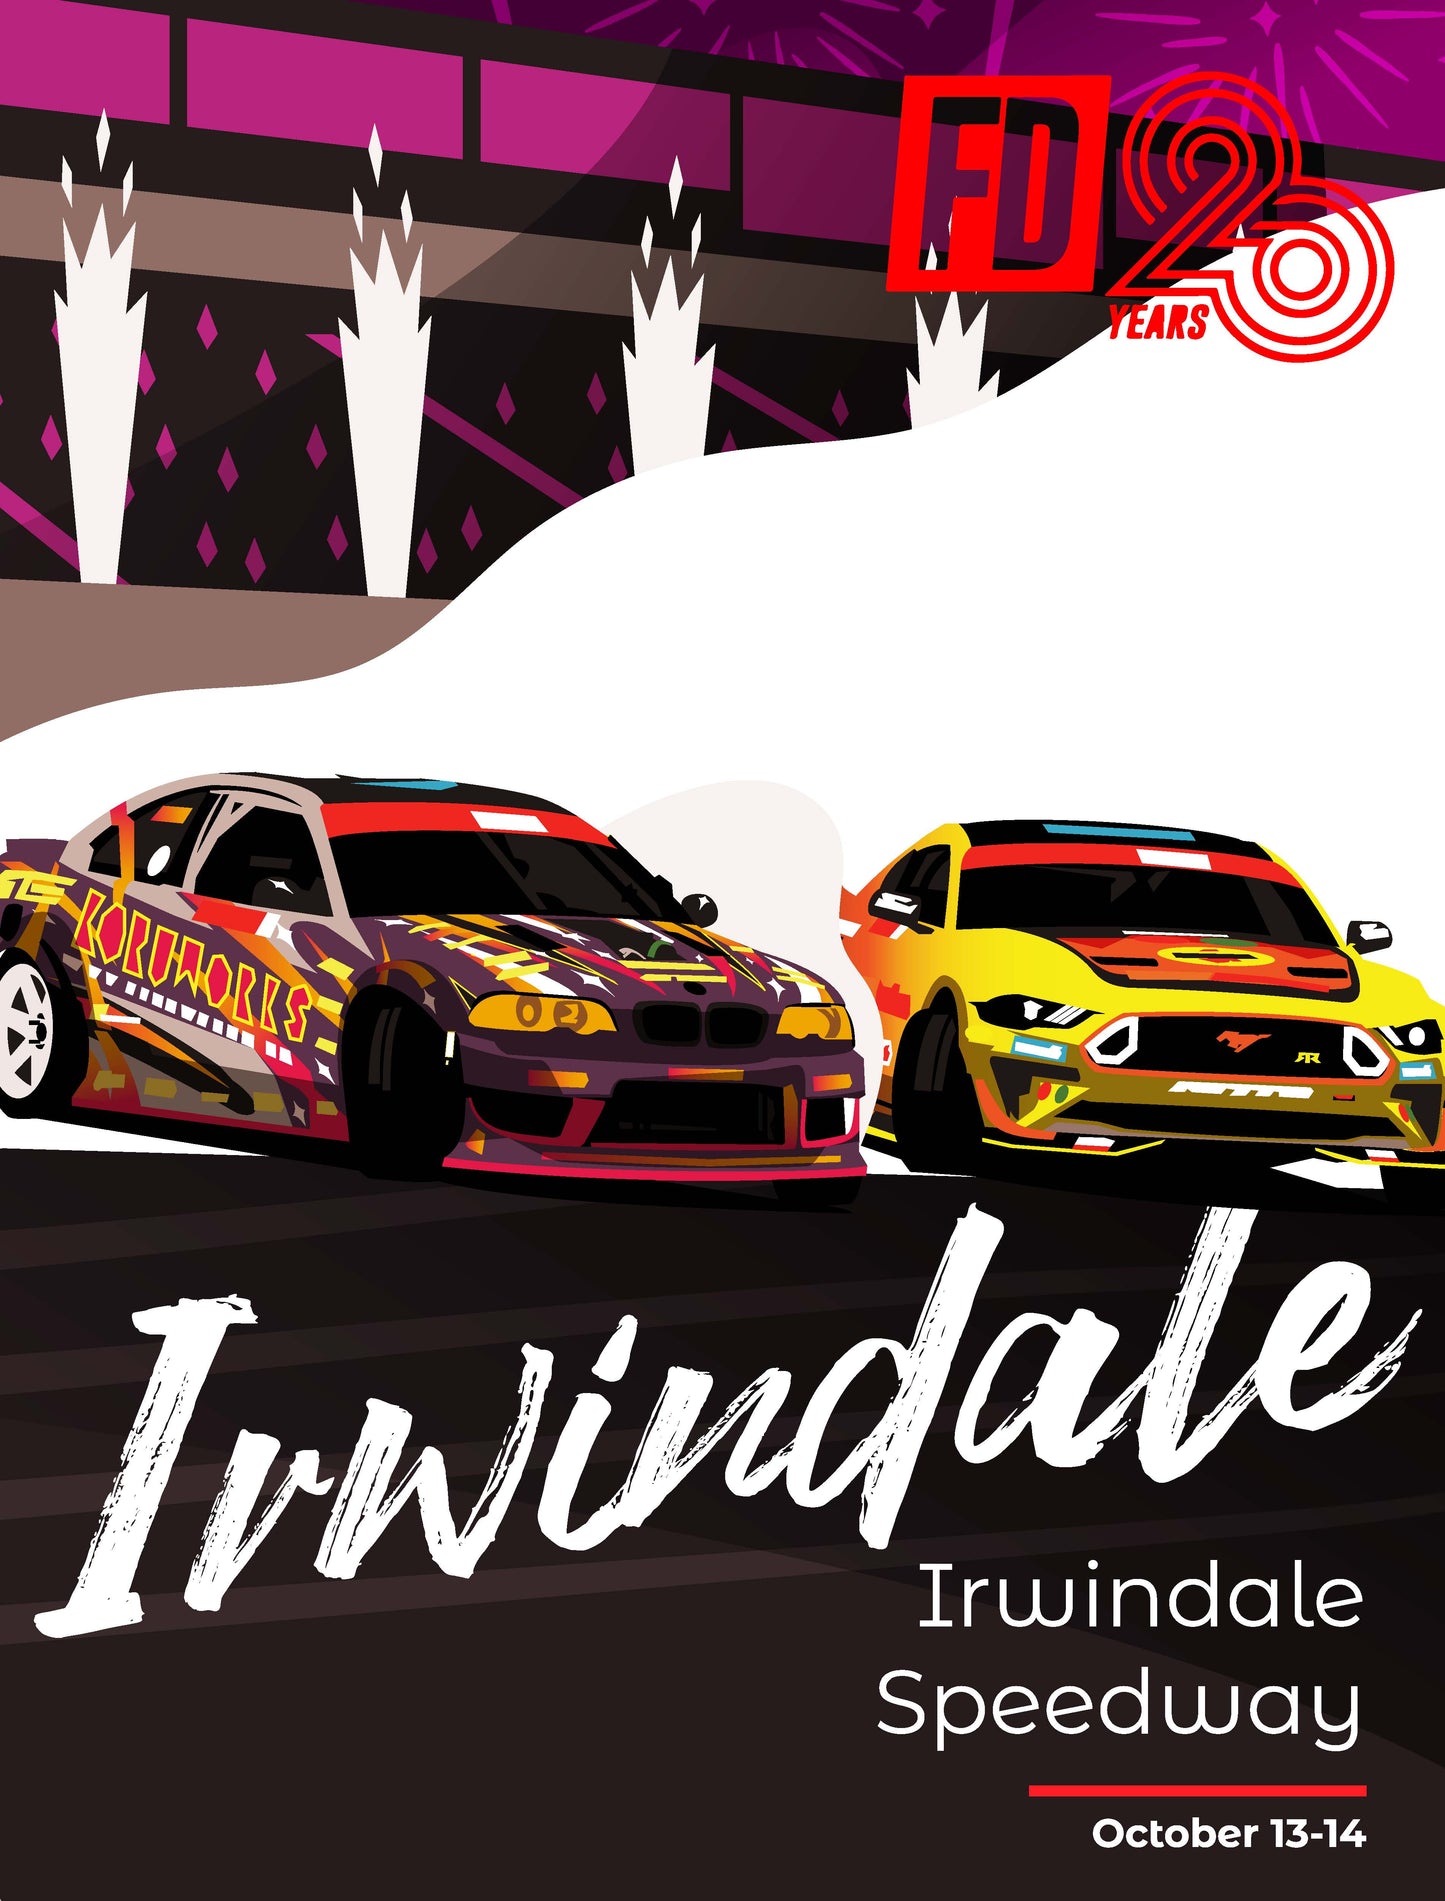 Formula DRIFT Limited Edition Poster - Irwindale, CA